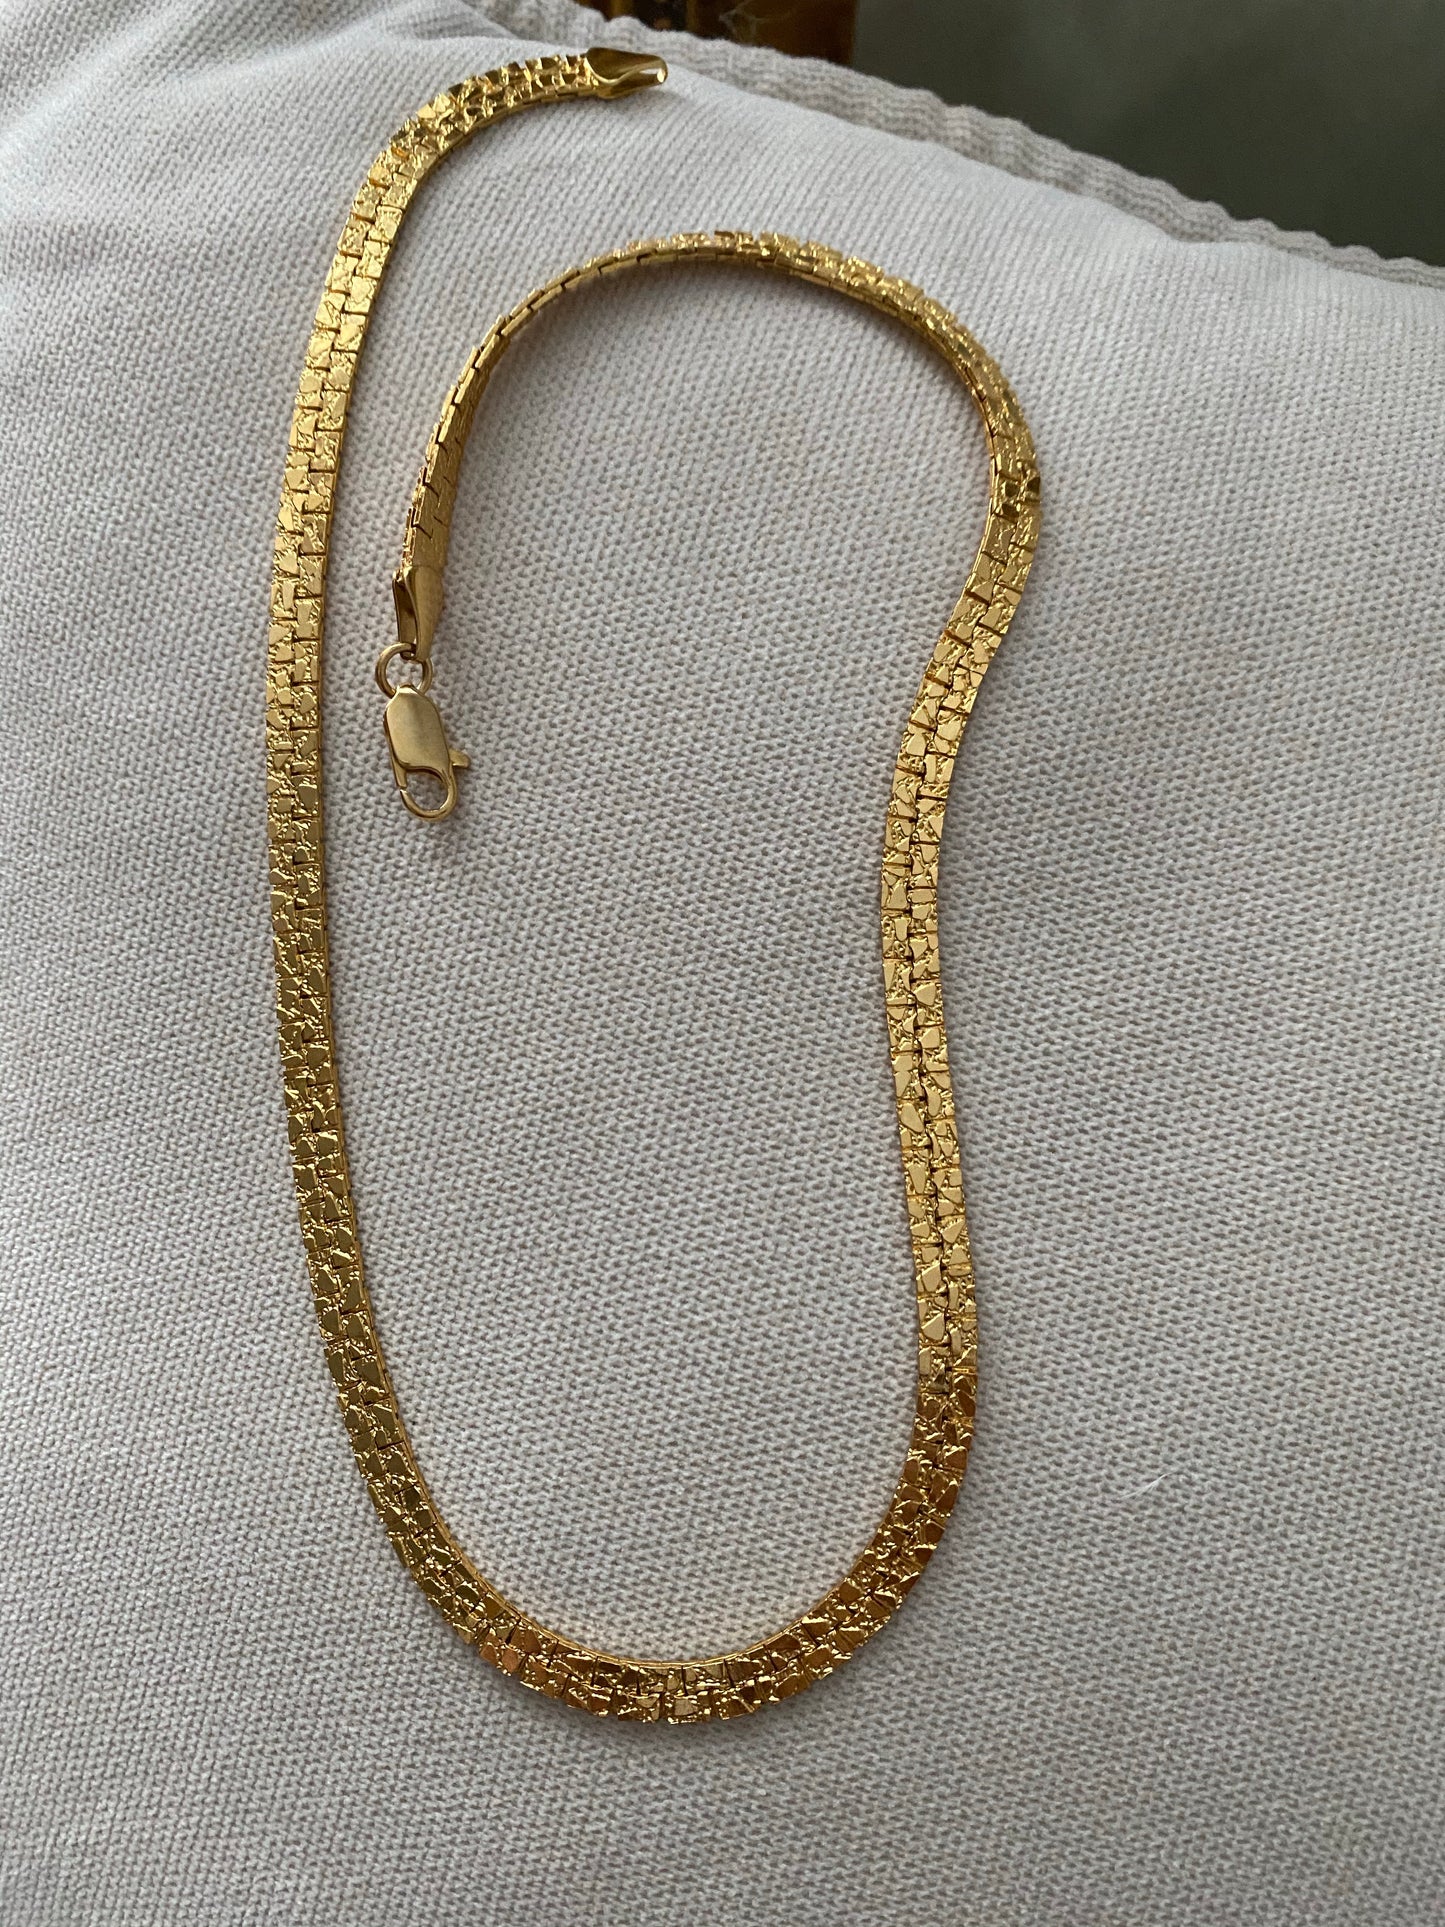 The most perfect gold chain, 1970’s